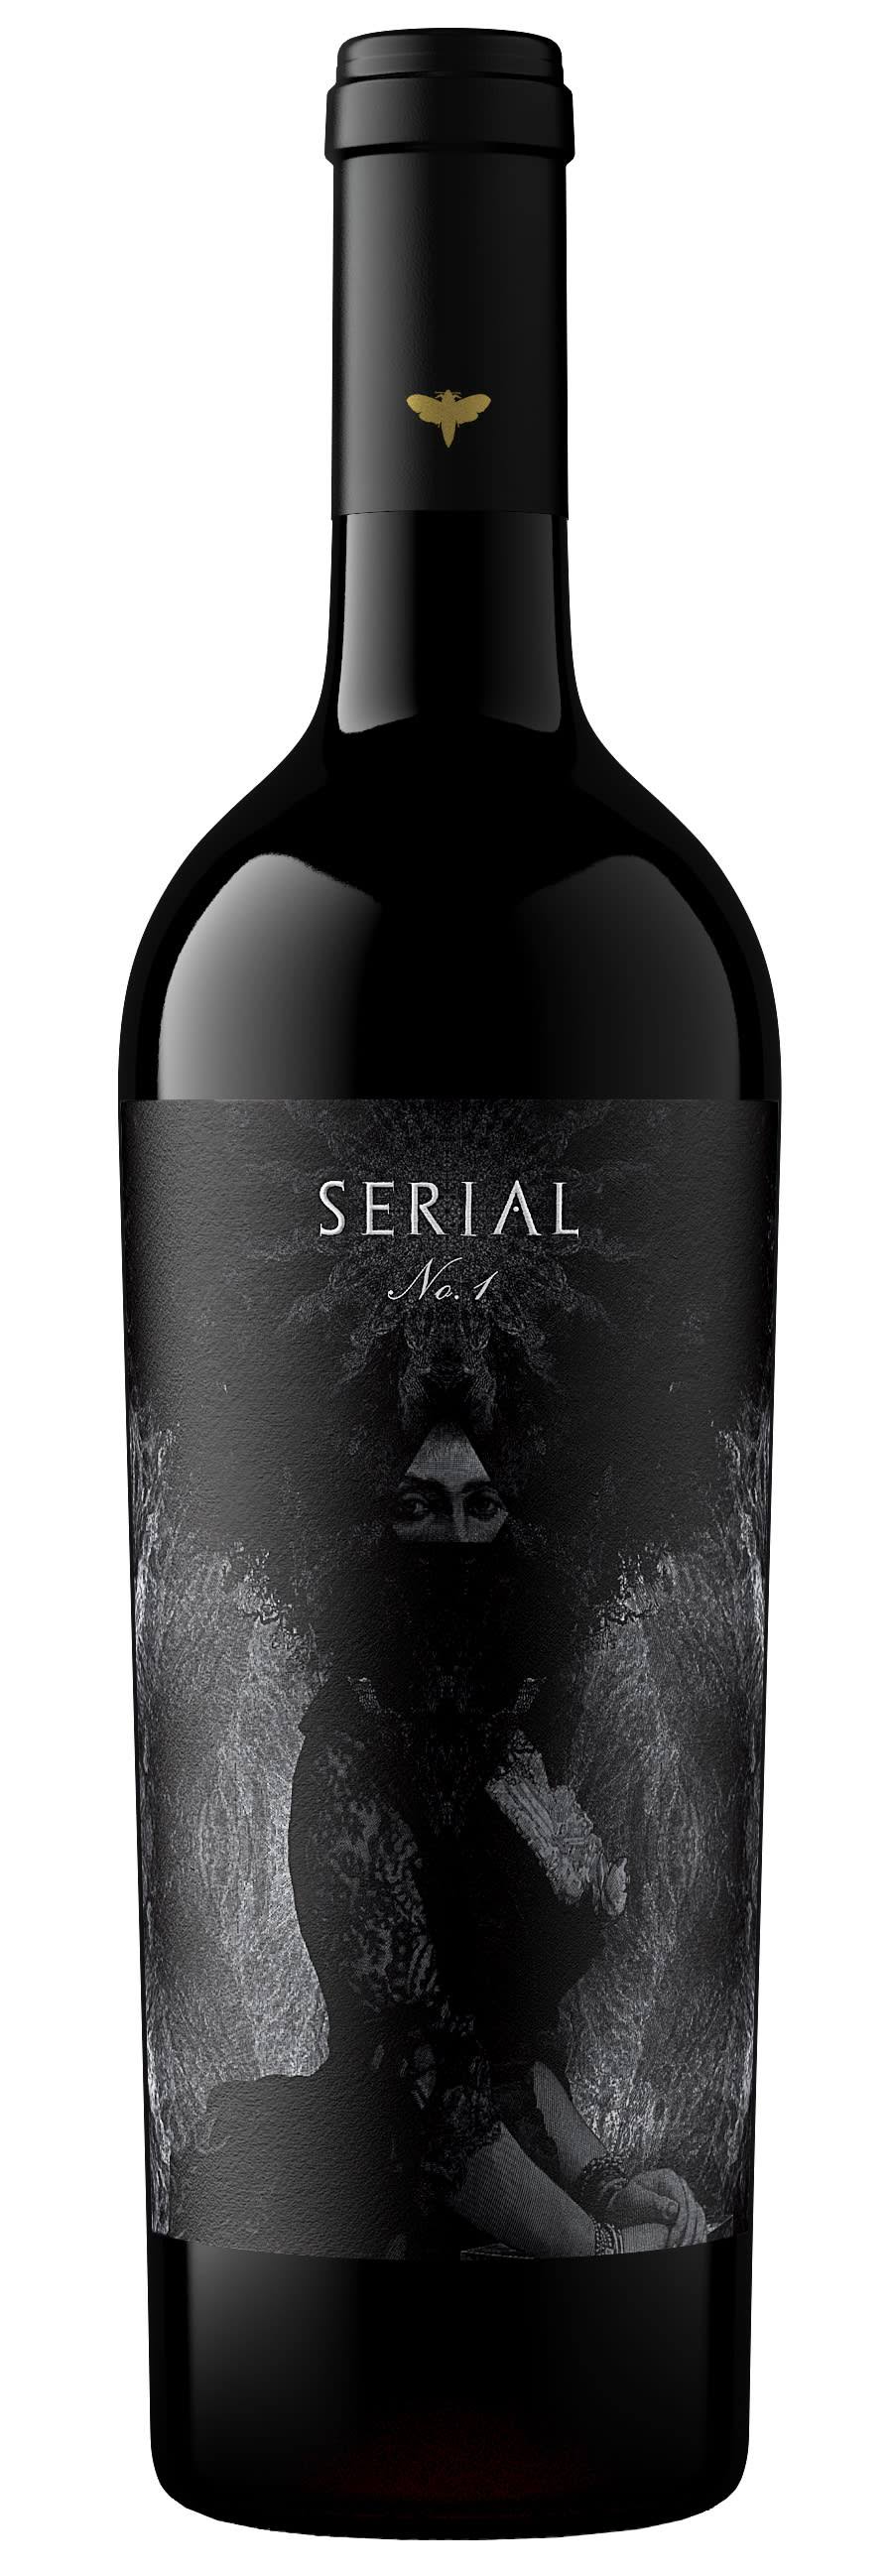 Serial Red Blend NO. Paso Robles